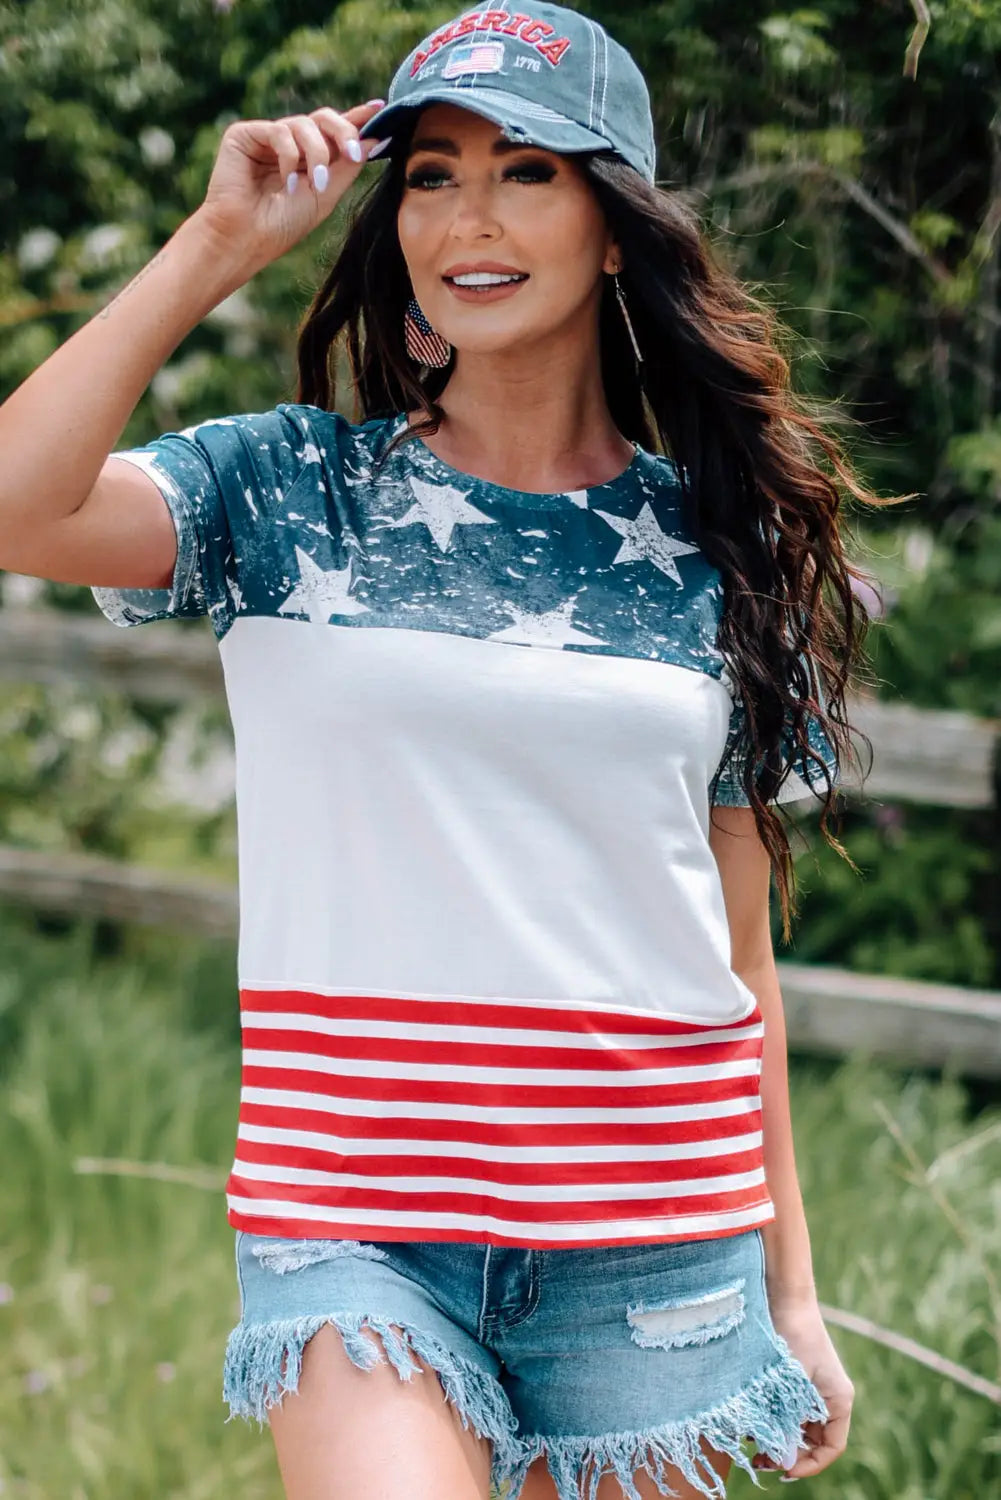 The us stars and stripes inspired top - t-shirts